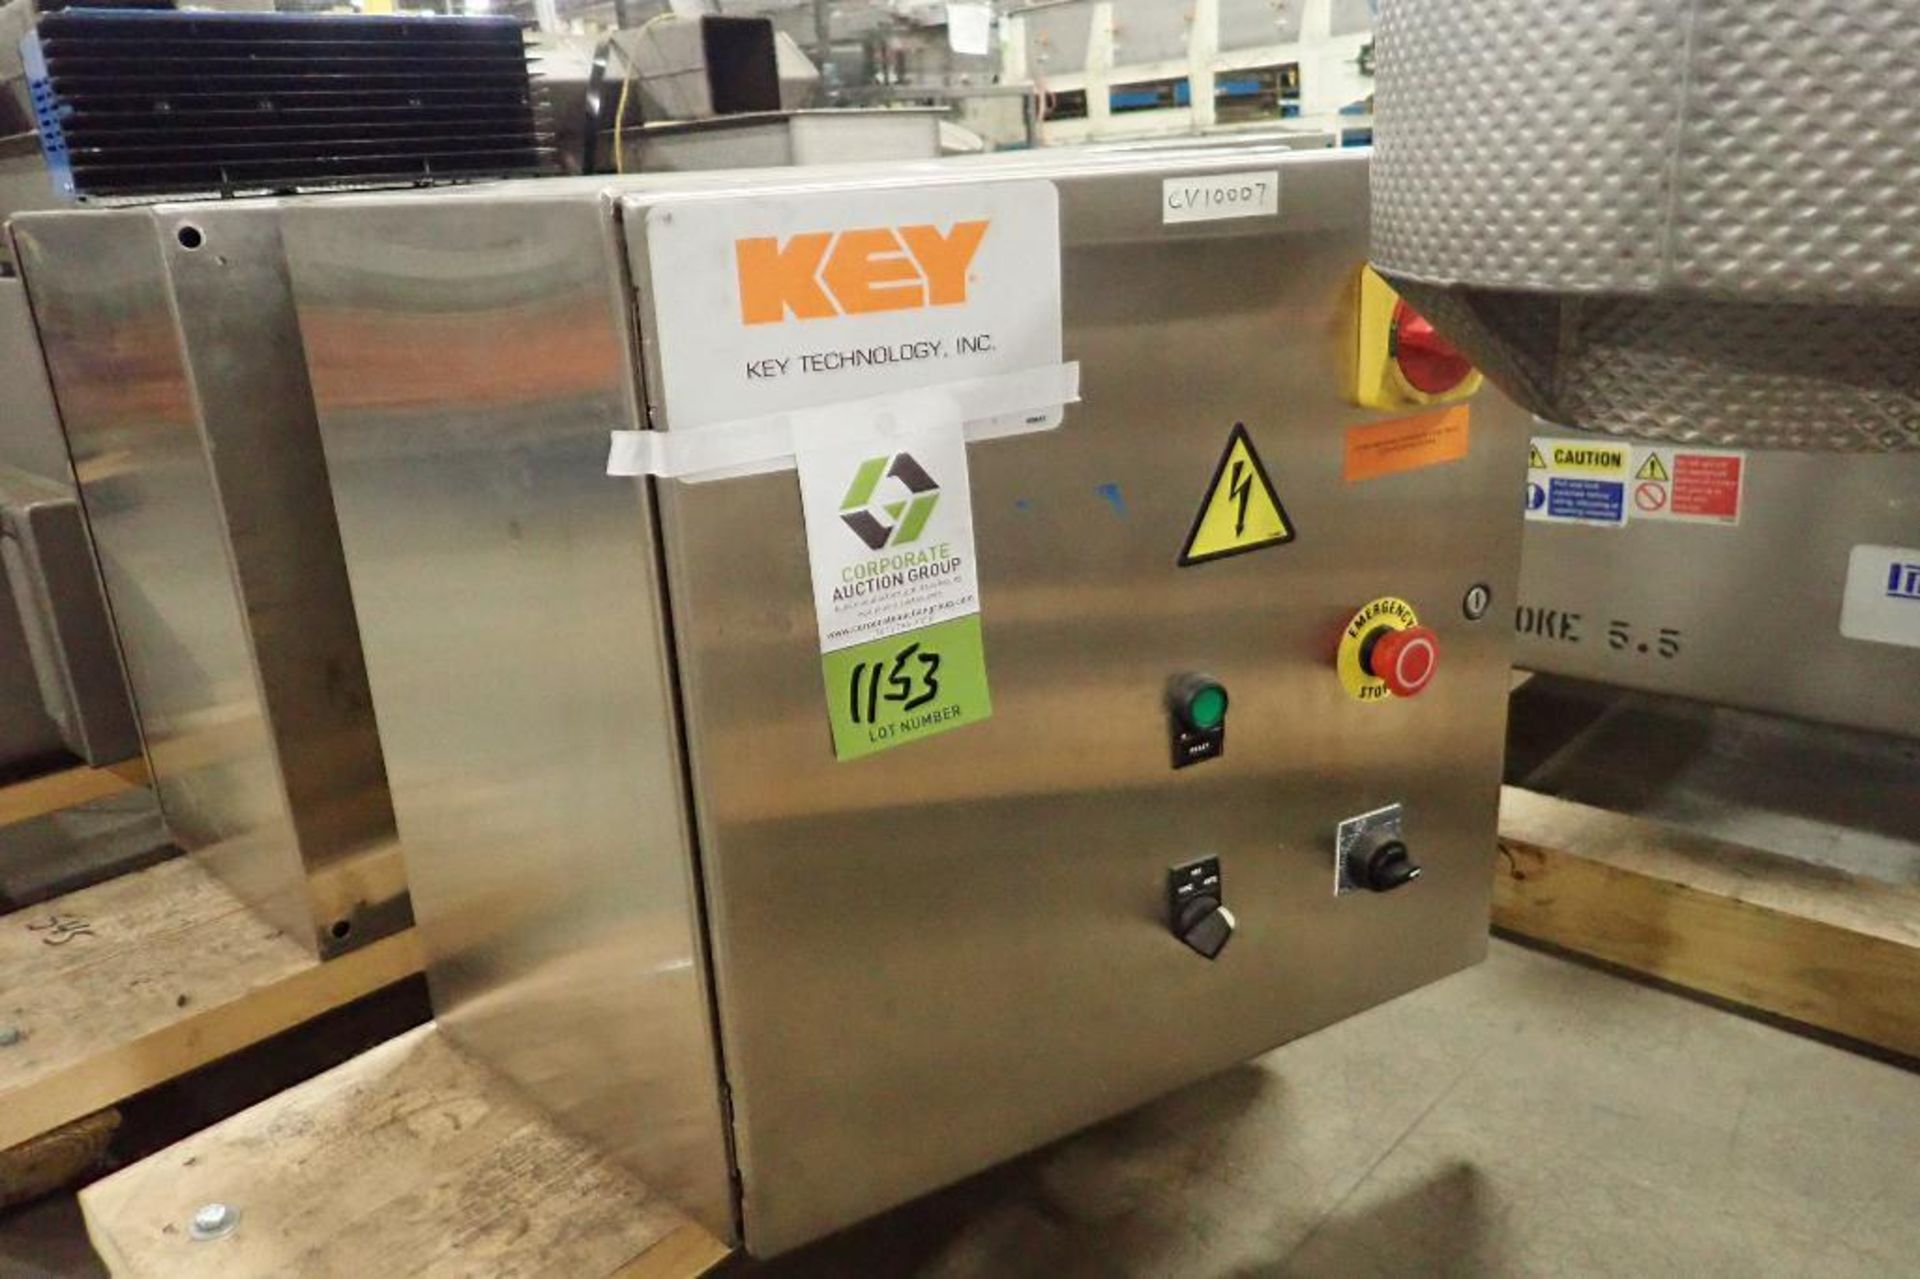 Key iso flow vibratory conveyor, Model 434941-1, SN 06-153786-1, SS bed, 68 in. long x 12 in. wide x - Image 6 of 7